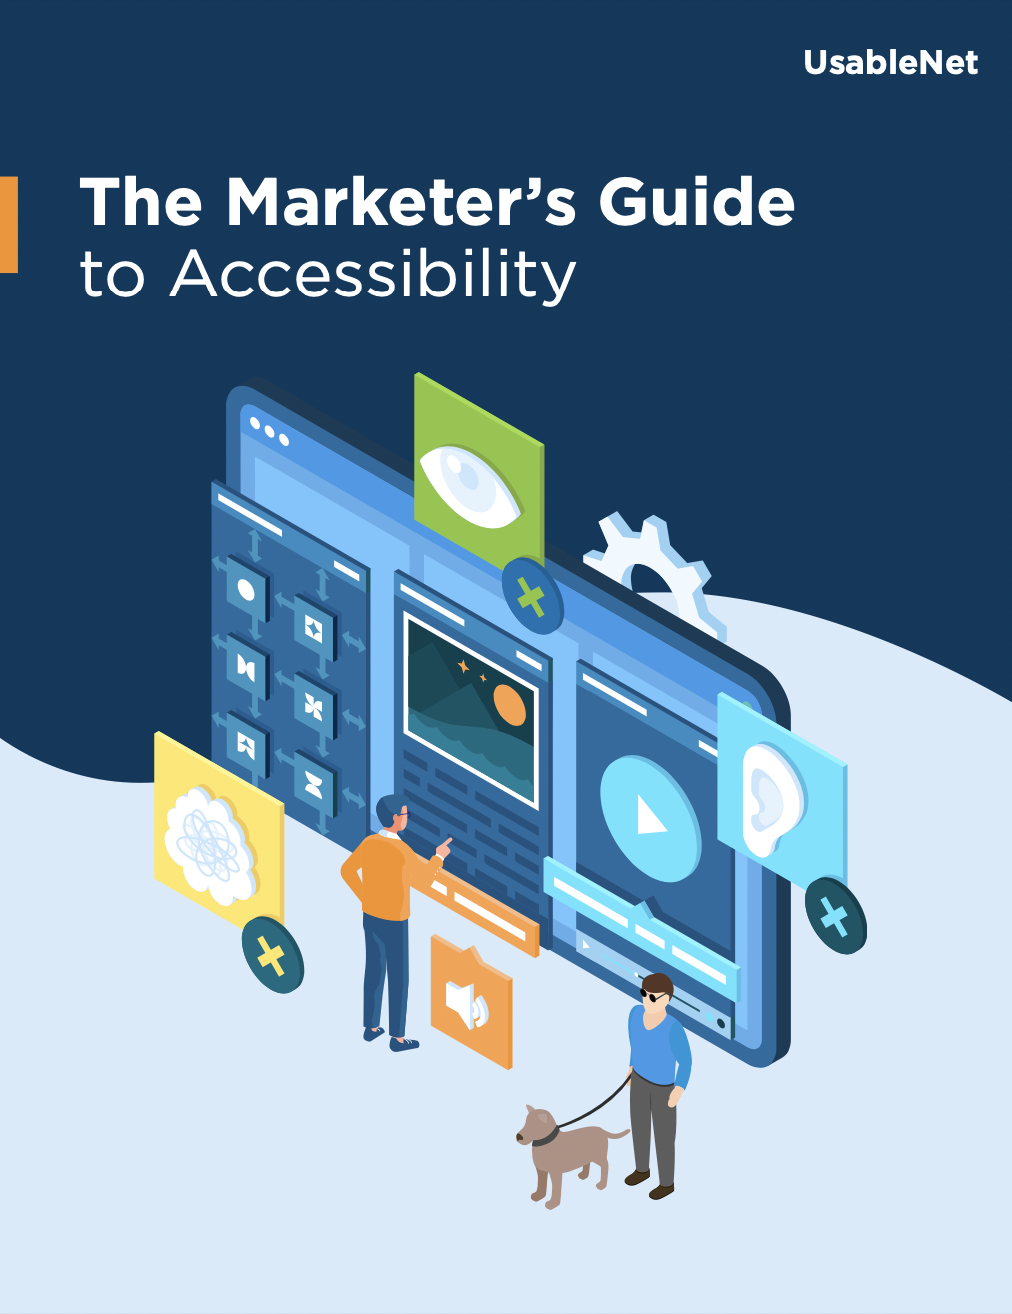 Cover of The Marketer's Guide to Accessibility with illustration 